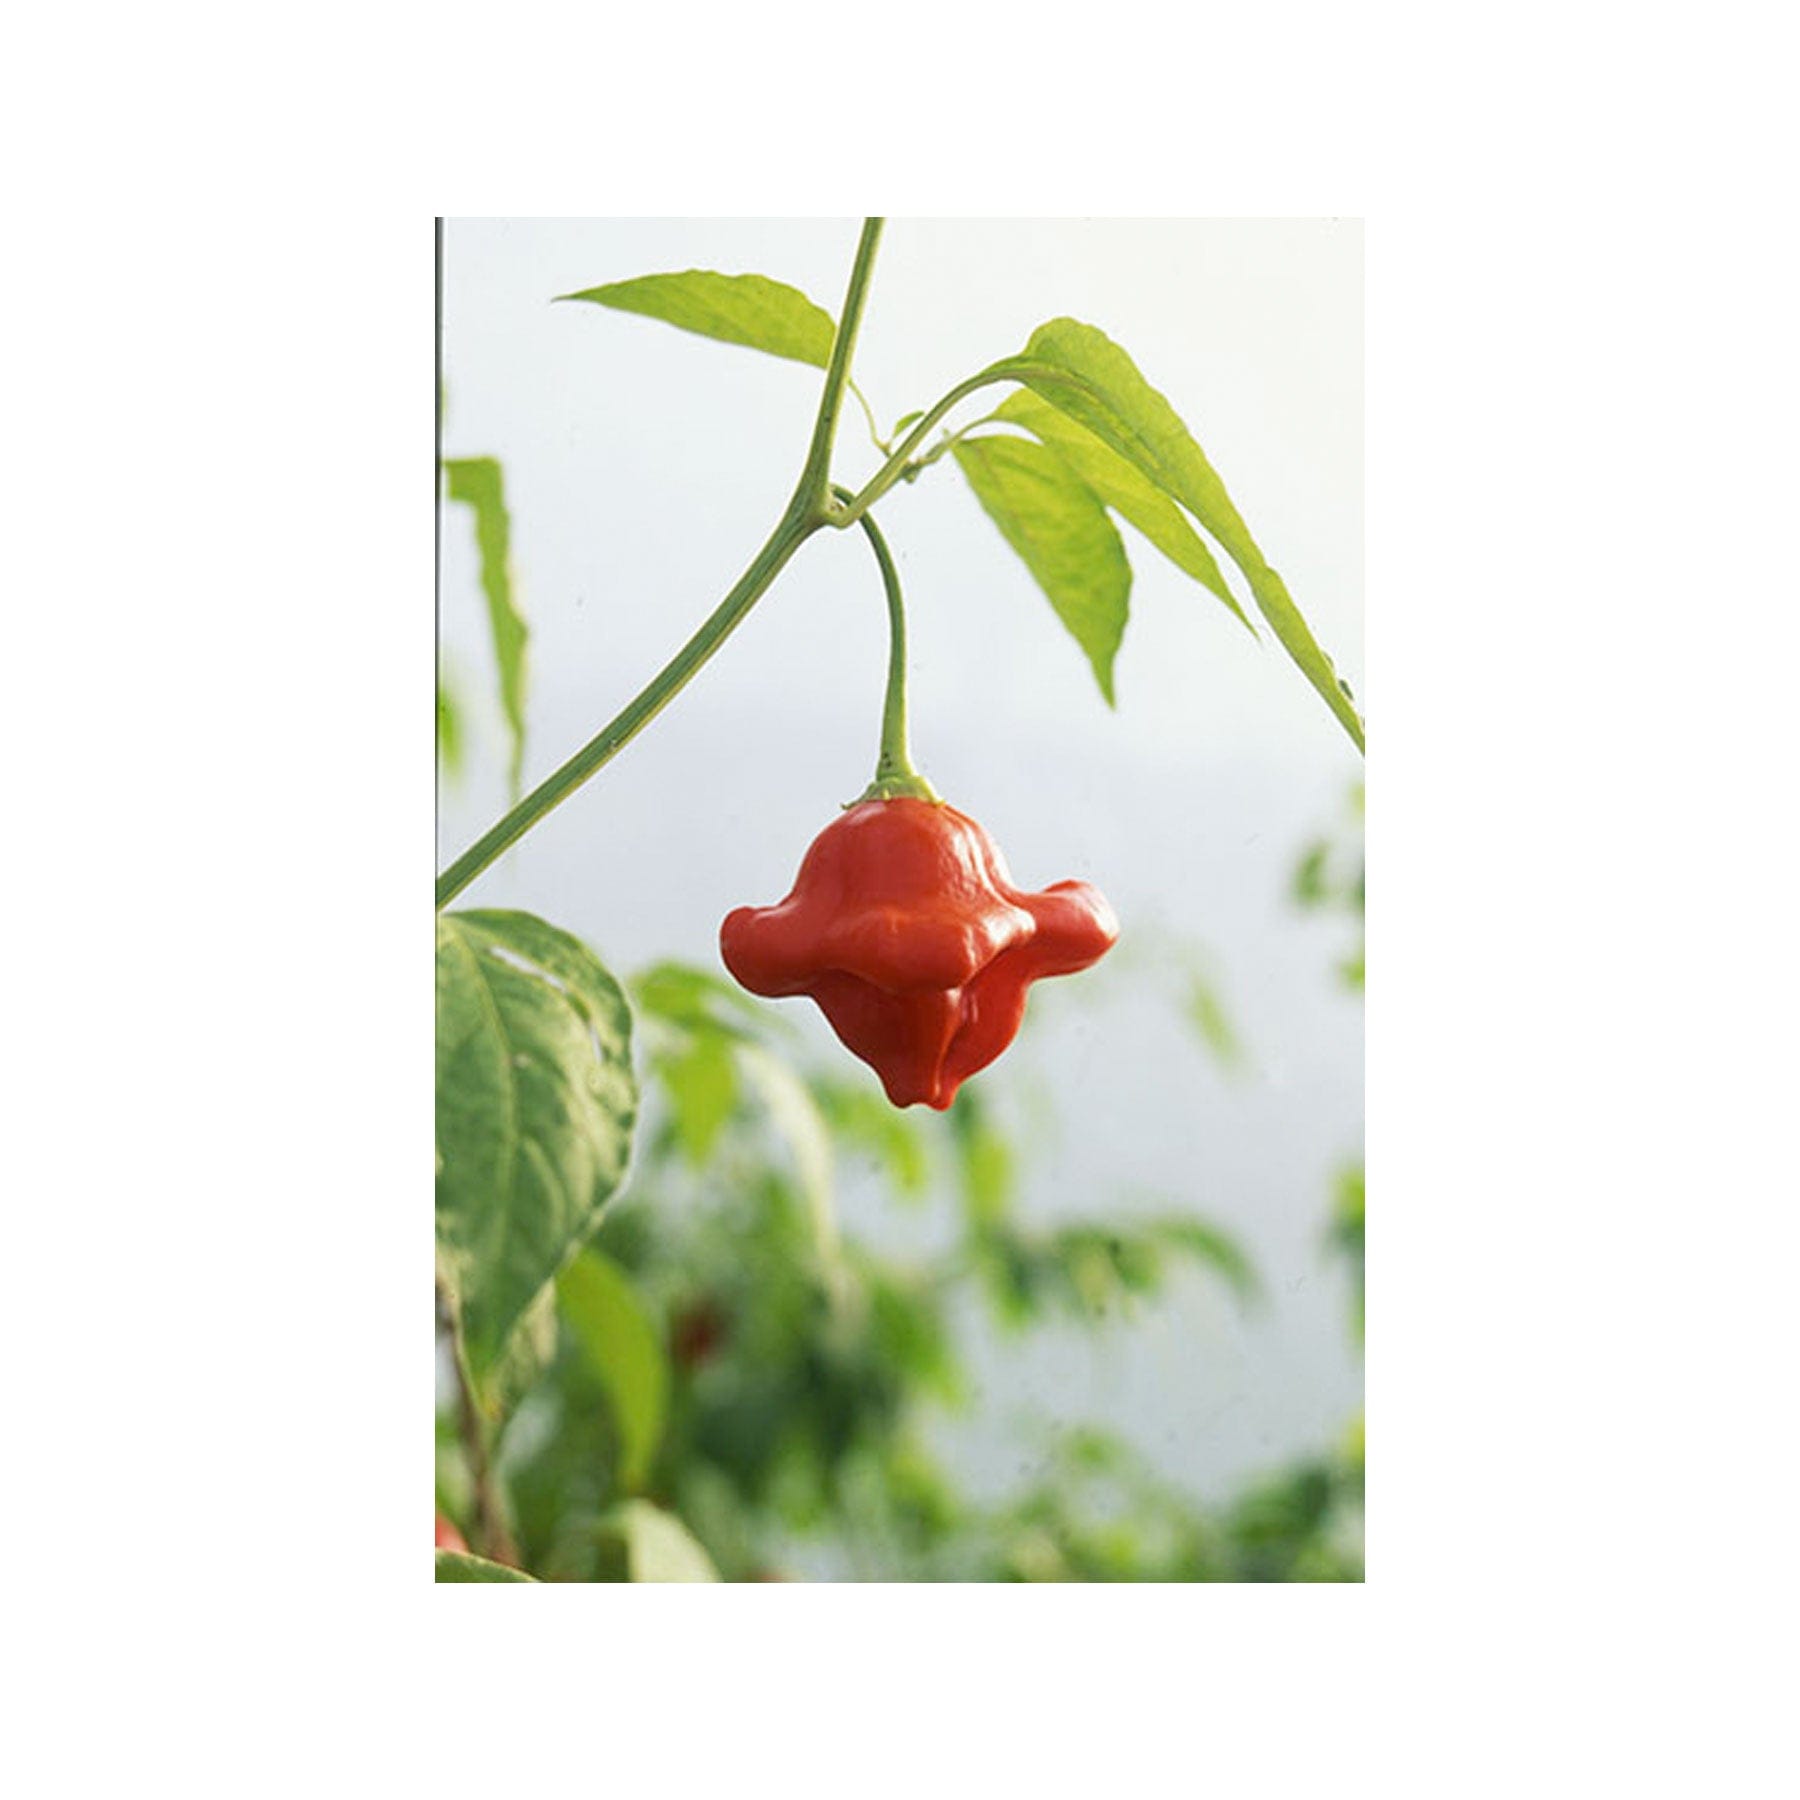 Tinkerbell chilli seeds